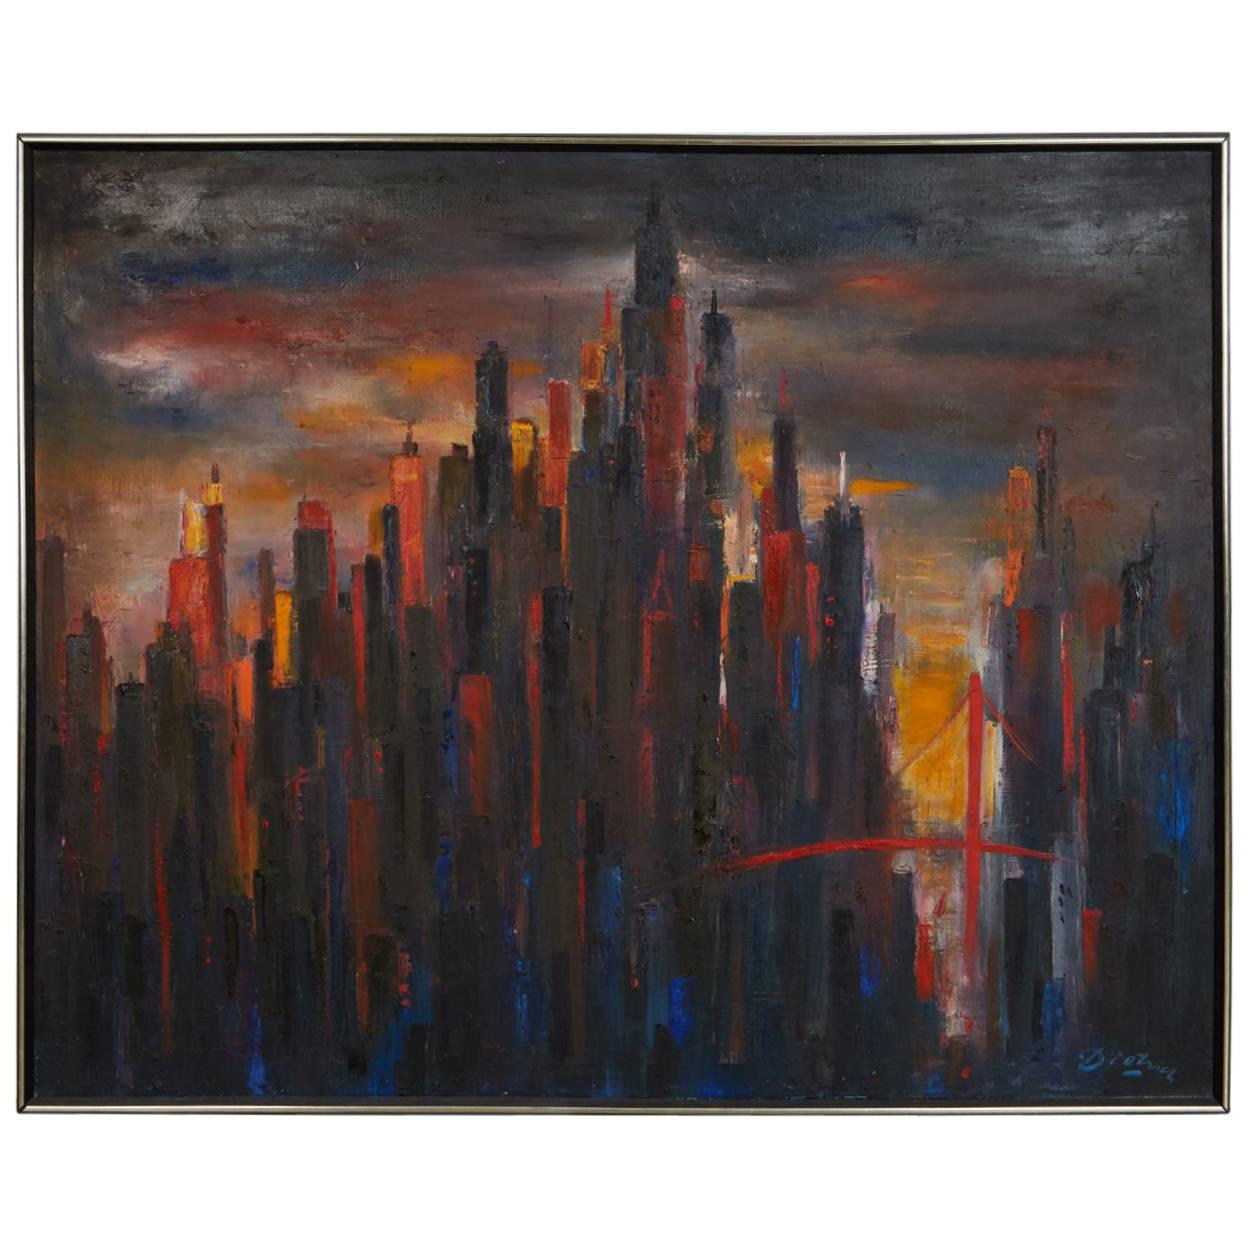 Large Cityscape Skyline Oil Painting, by Dietrich Grunewald for Van Amstel